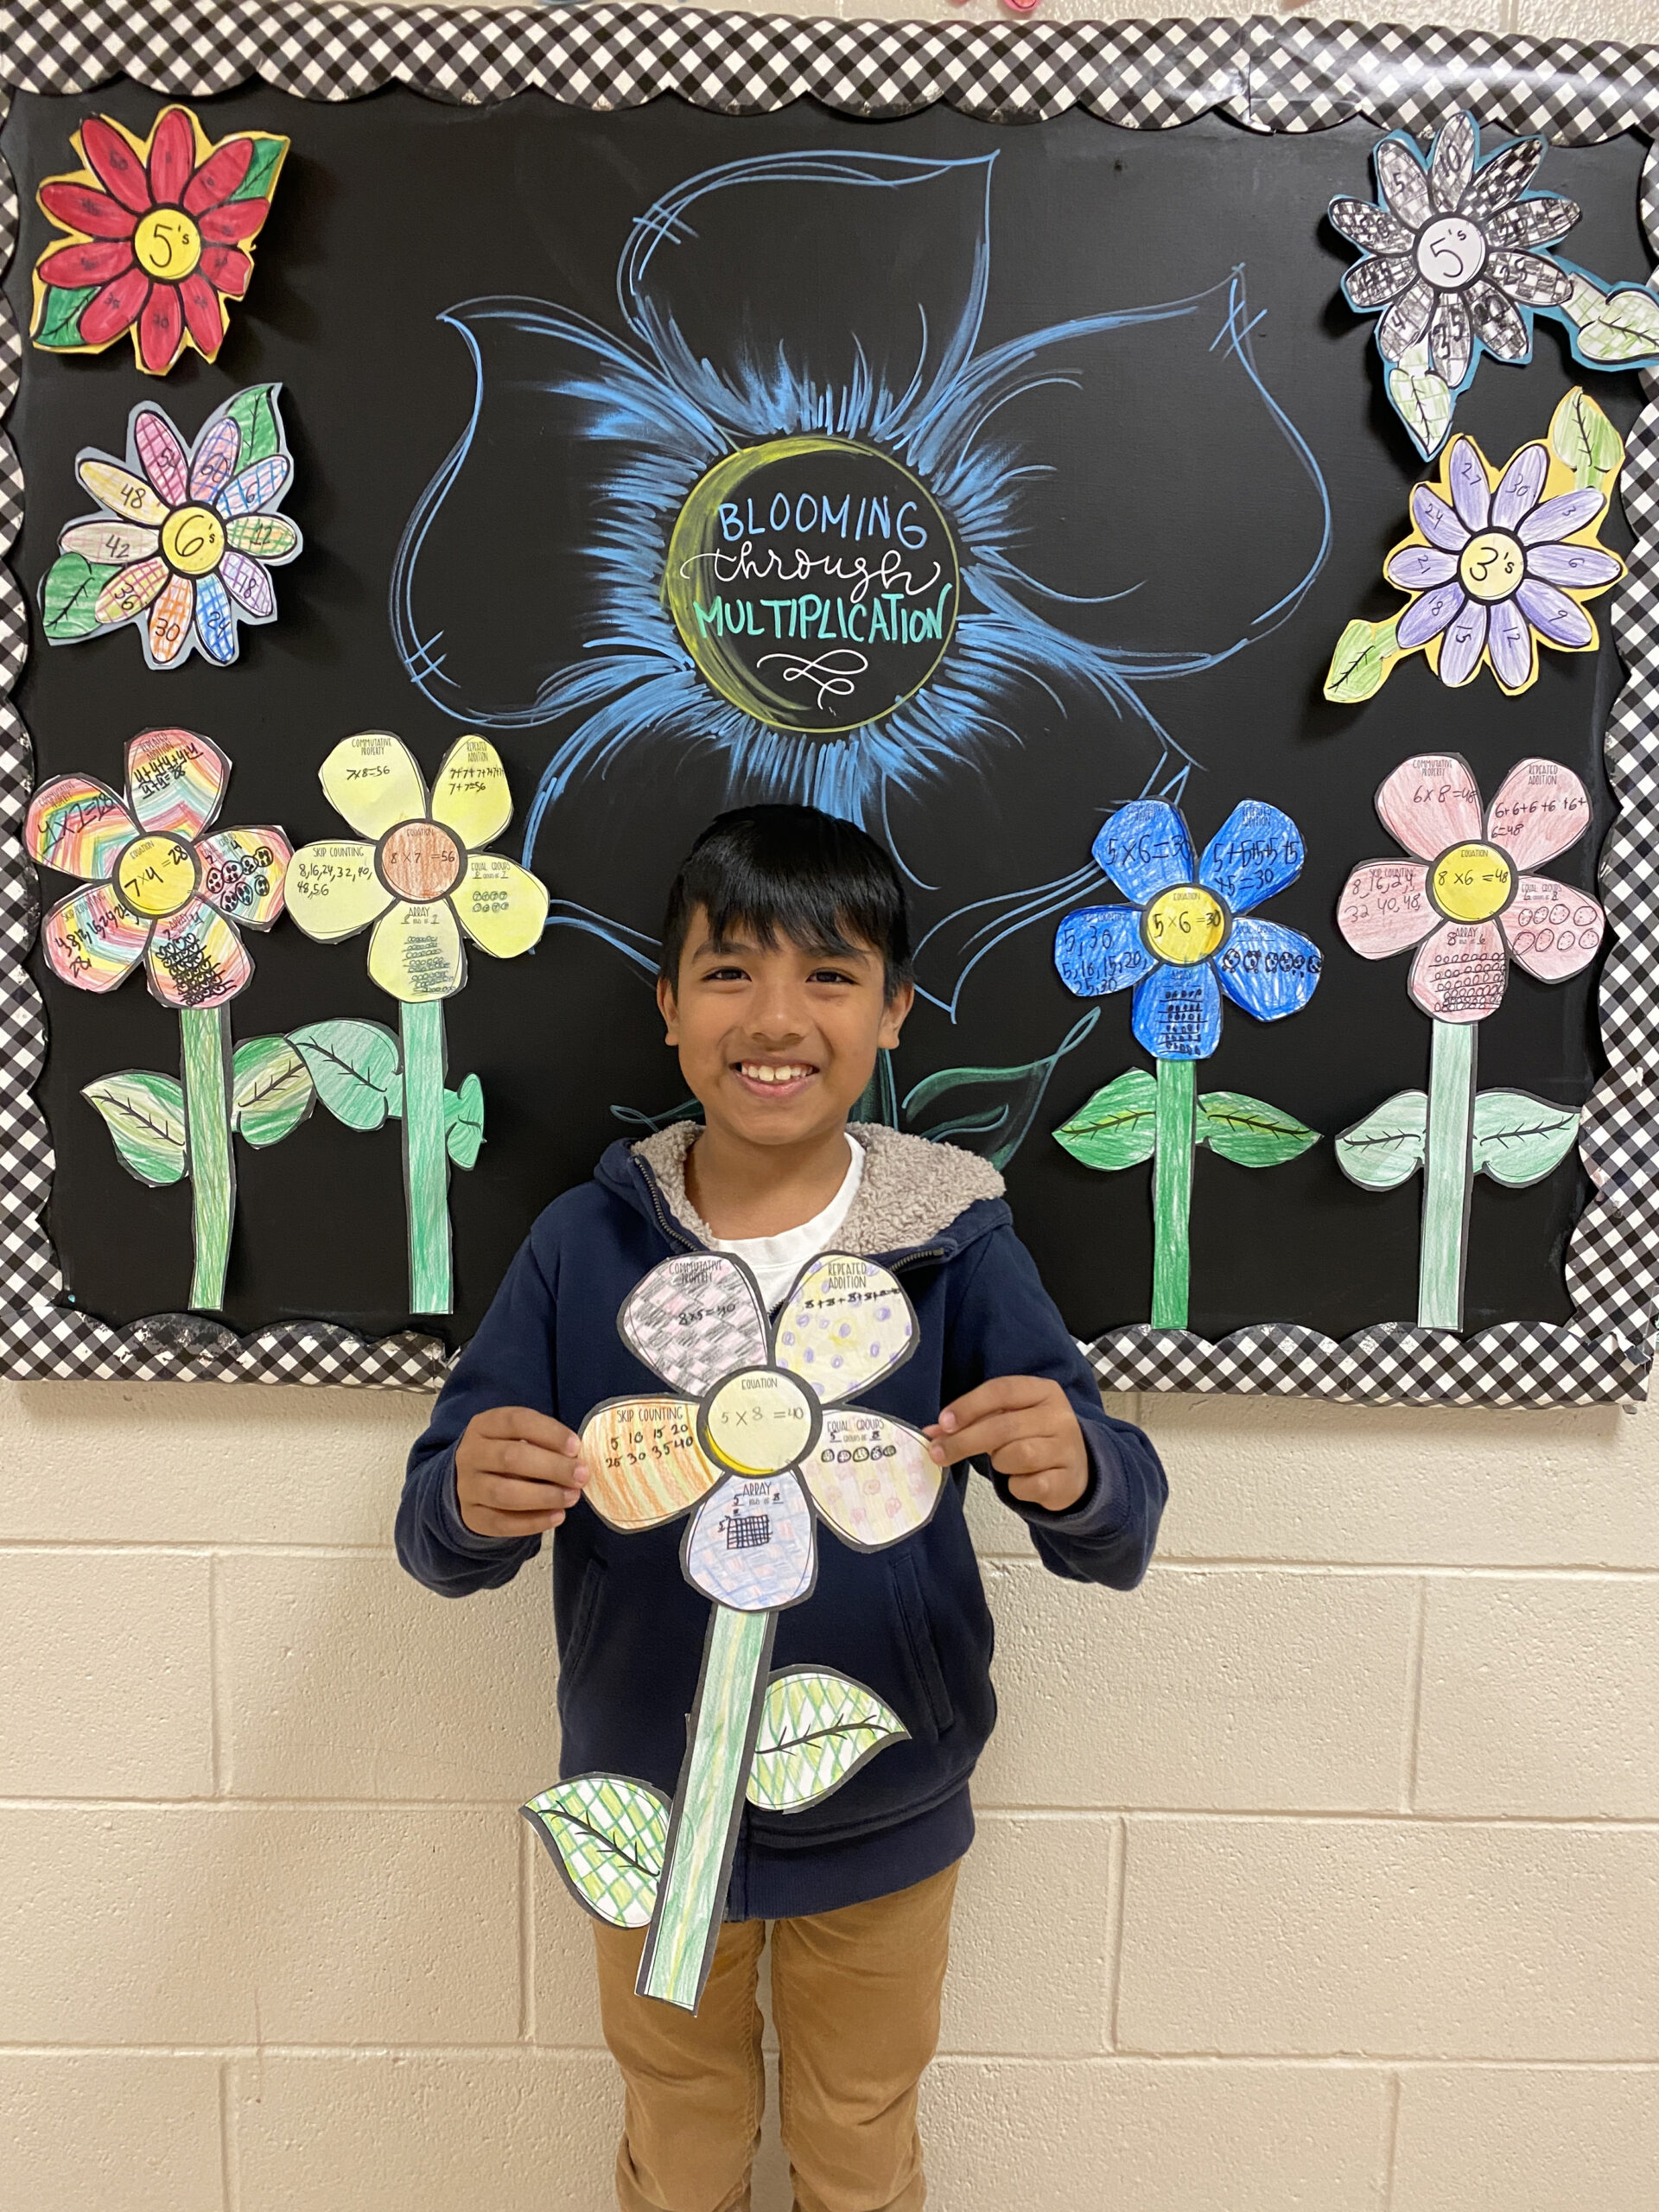 Students in Claire Urizzo’s class at Hampton Bays Elementary School, including Cristofer Huerta Potrero, practiced and memorized multiplication problems through a creative, spring-themed project. Each student received a paper flower and a multiplication problem. They were then challenged to make an array, skip count, and show repeated addition and equal groups related to the problem on each petal of the flower. COURTESY HAMPTON BAYS SCHOOL DISTRICT